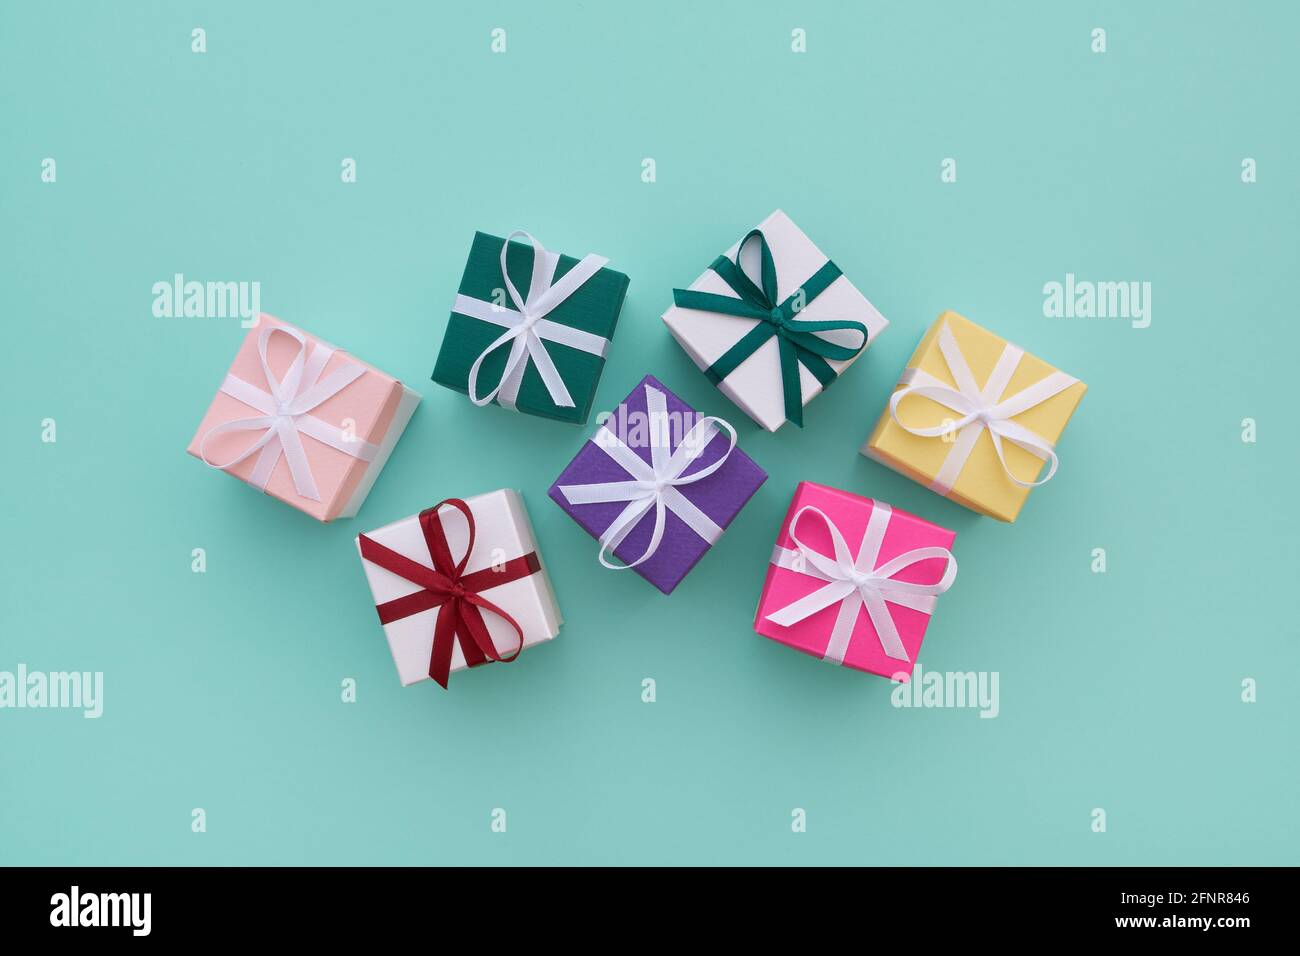 Several gift or bonbon boxes with ribbons on pastel green background. Top view, flat lay. Stock Photo